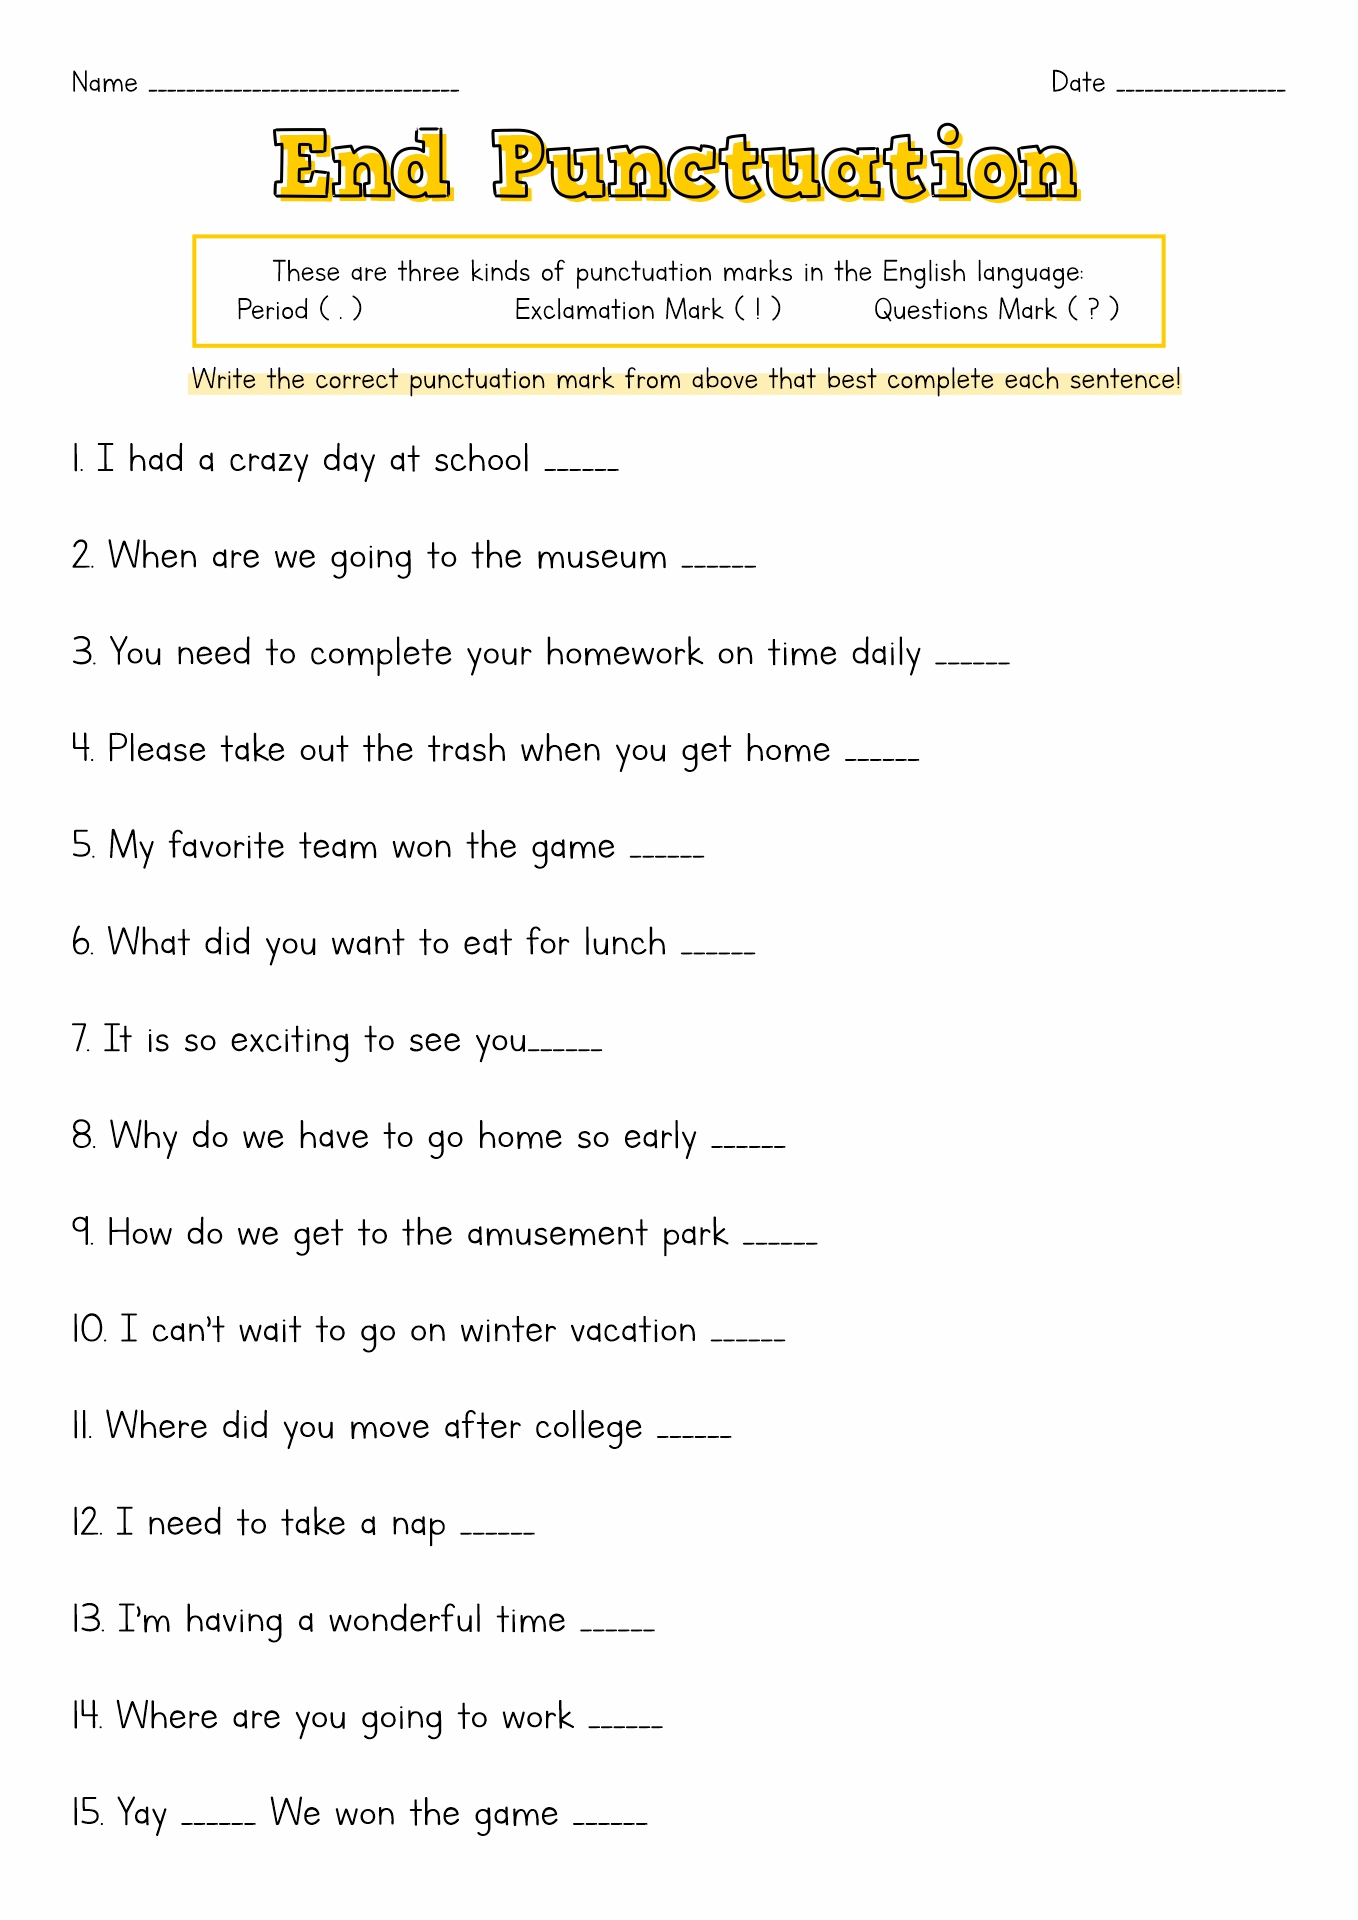 12-best-images-of-free-printable-comma-worksheets-comma-worksheets-free-printable-punctuation